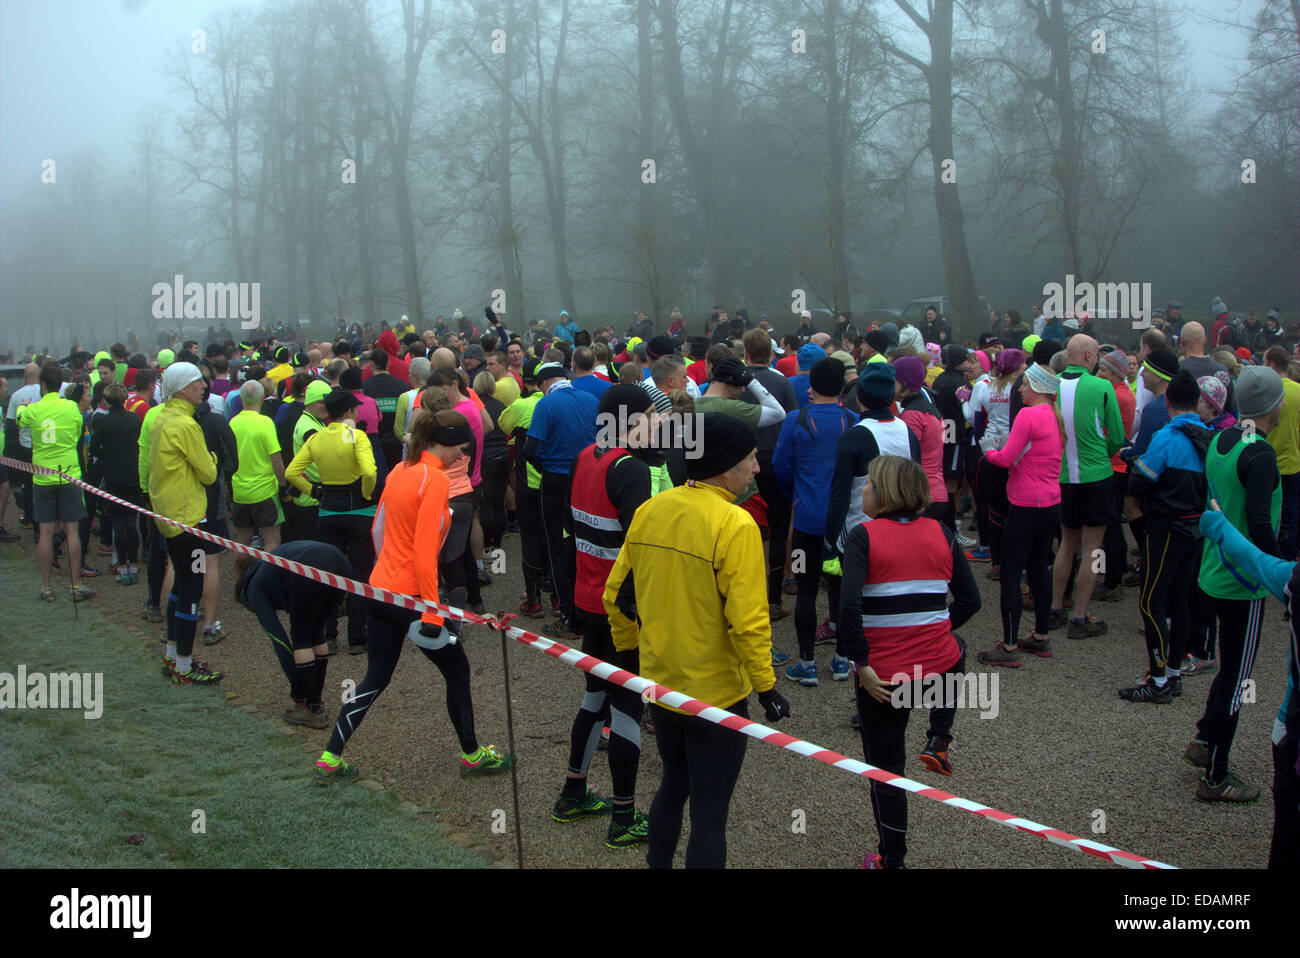 Alamy cliveden  On a misty & frosty January morning the Burnham Joggers held their annual 10k run, not as cold Stock Photo